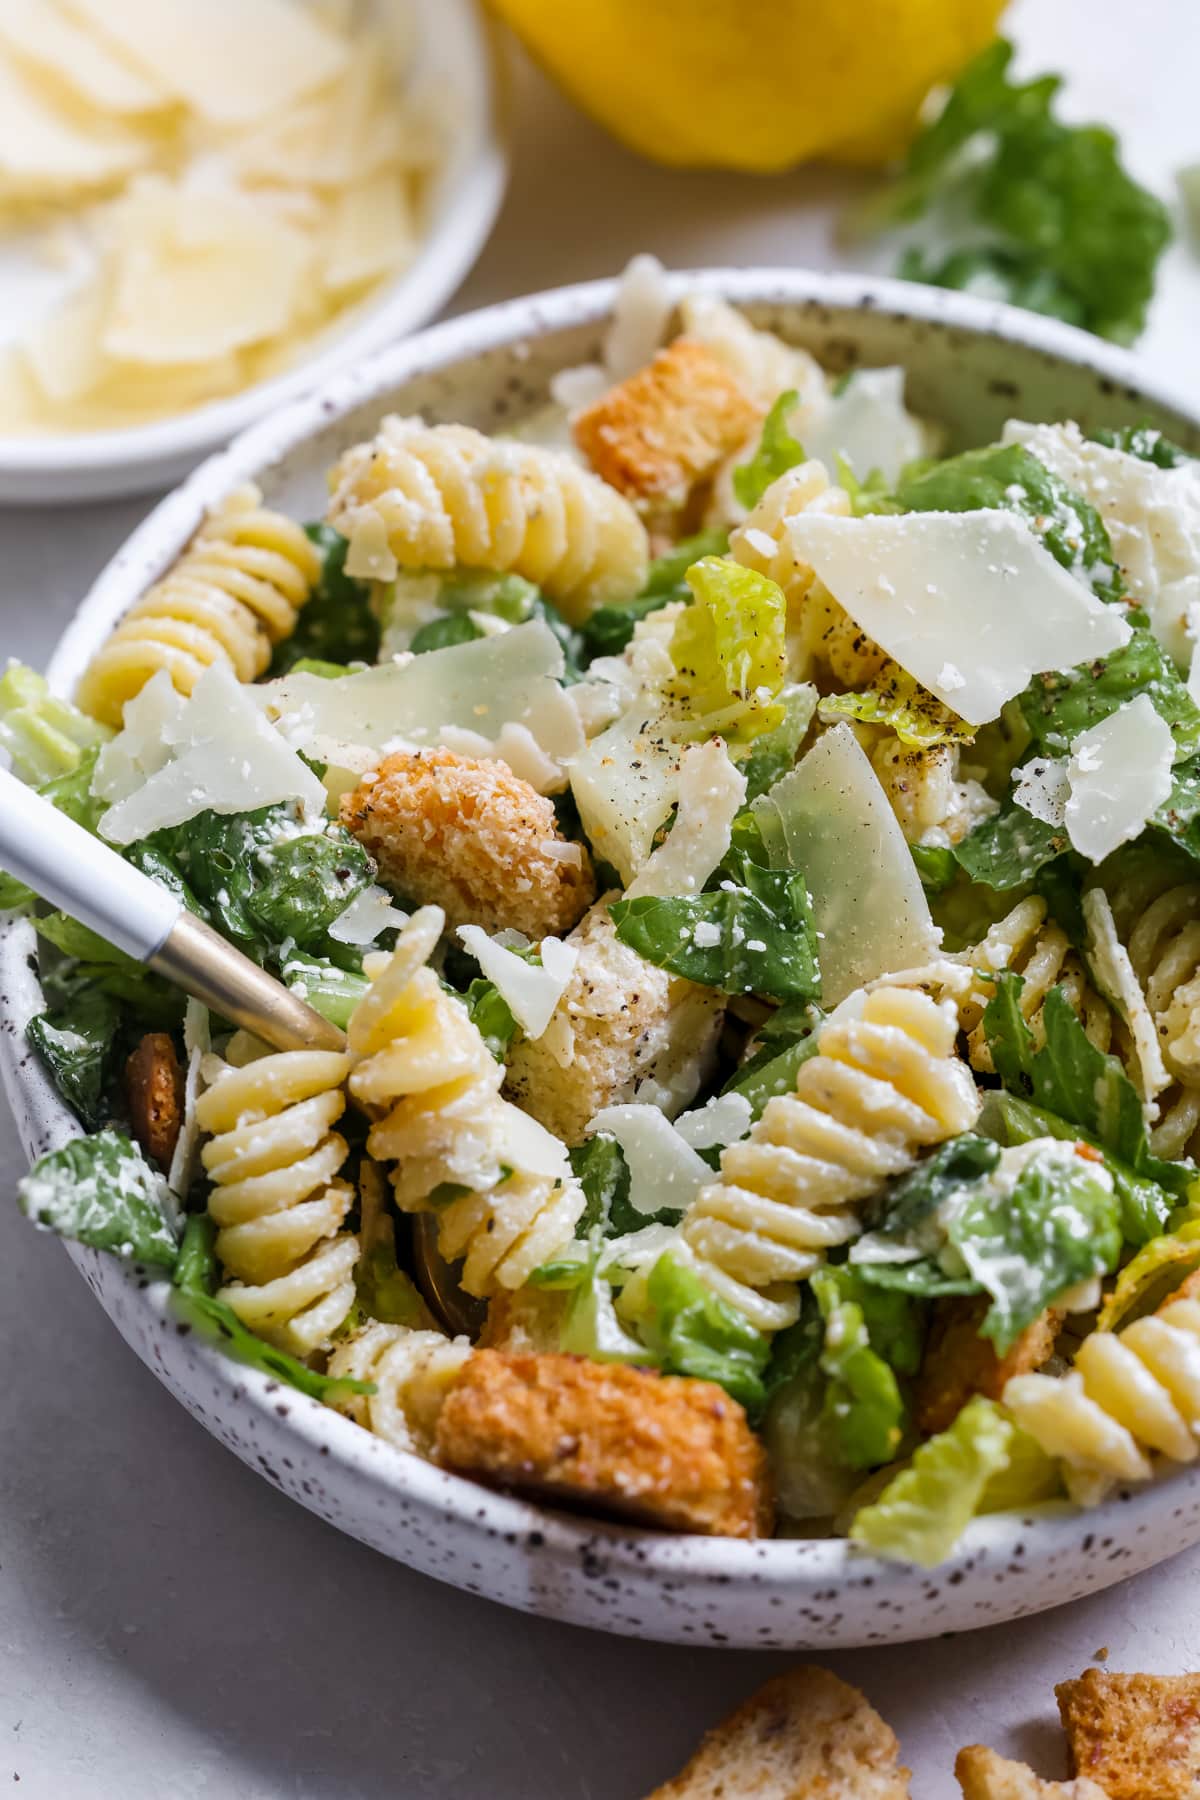 caesar salad on a white speckled plate with parmesan cheese, croutons, black pepper and rotini pasta.